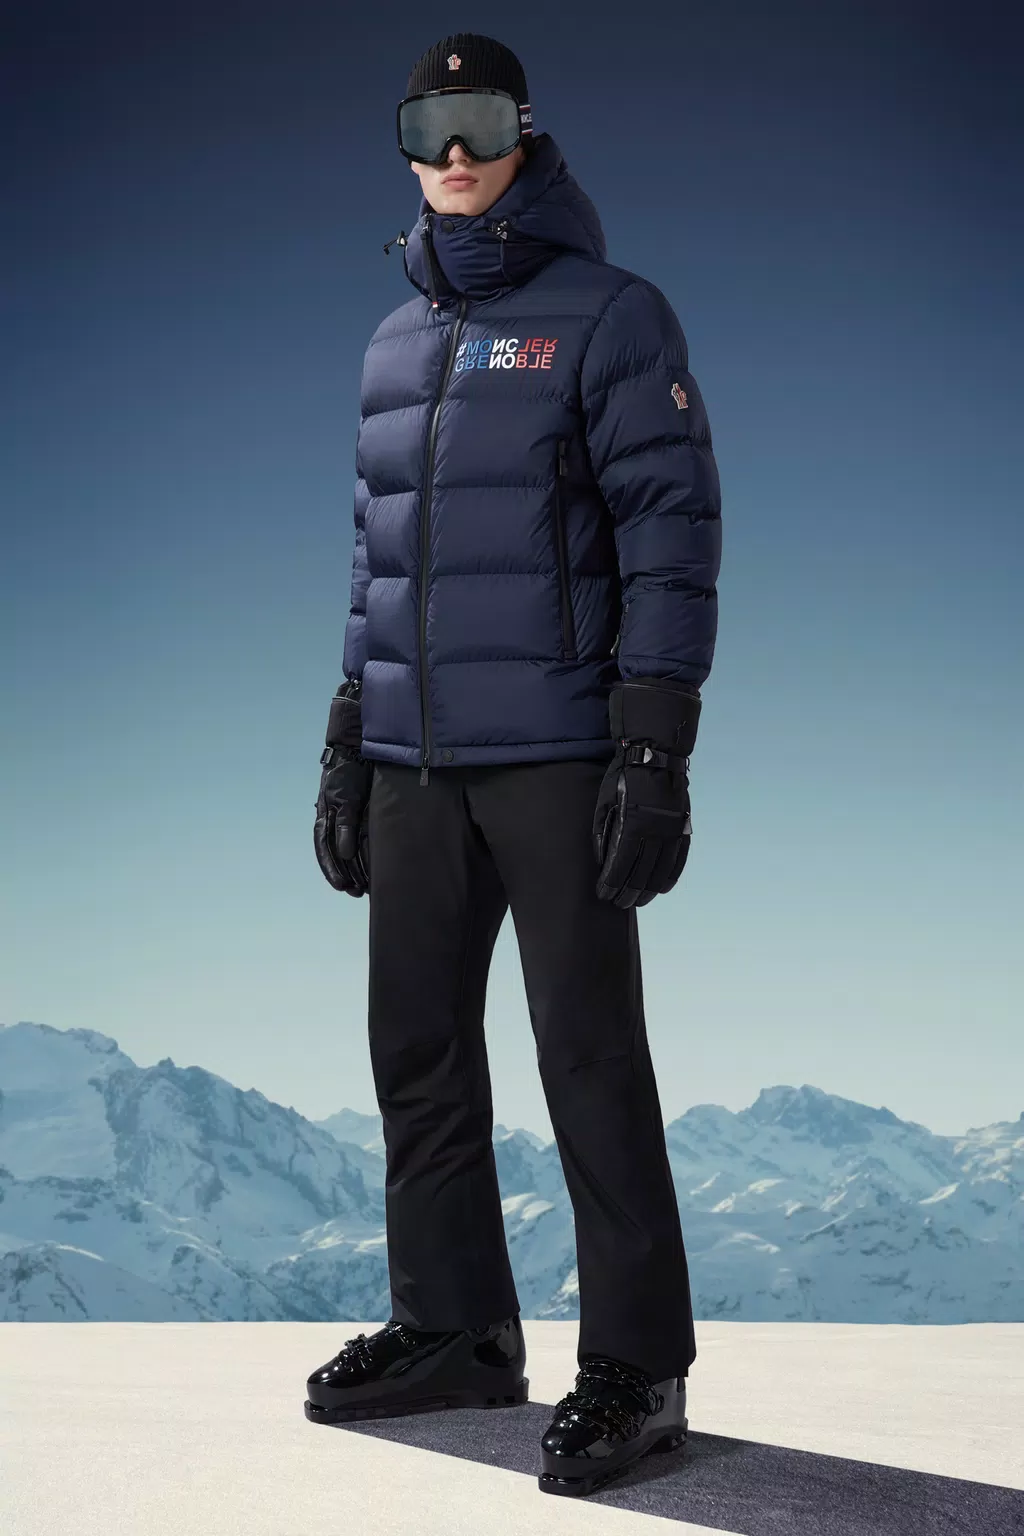 Grenoble Day-namic collection and Skiwear for Men | Moncler UK